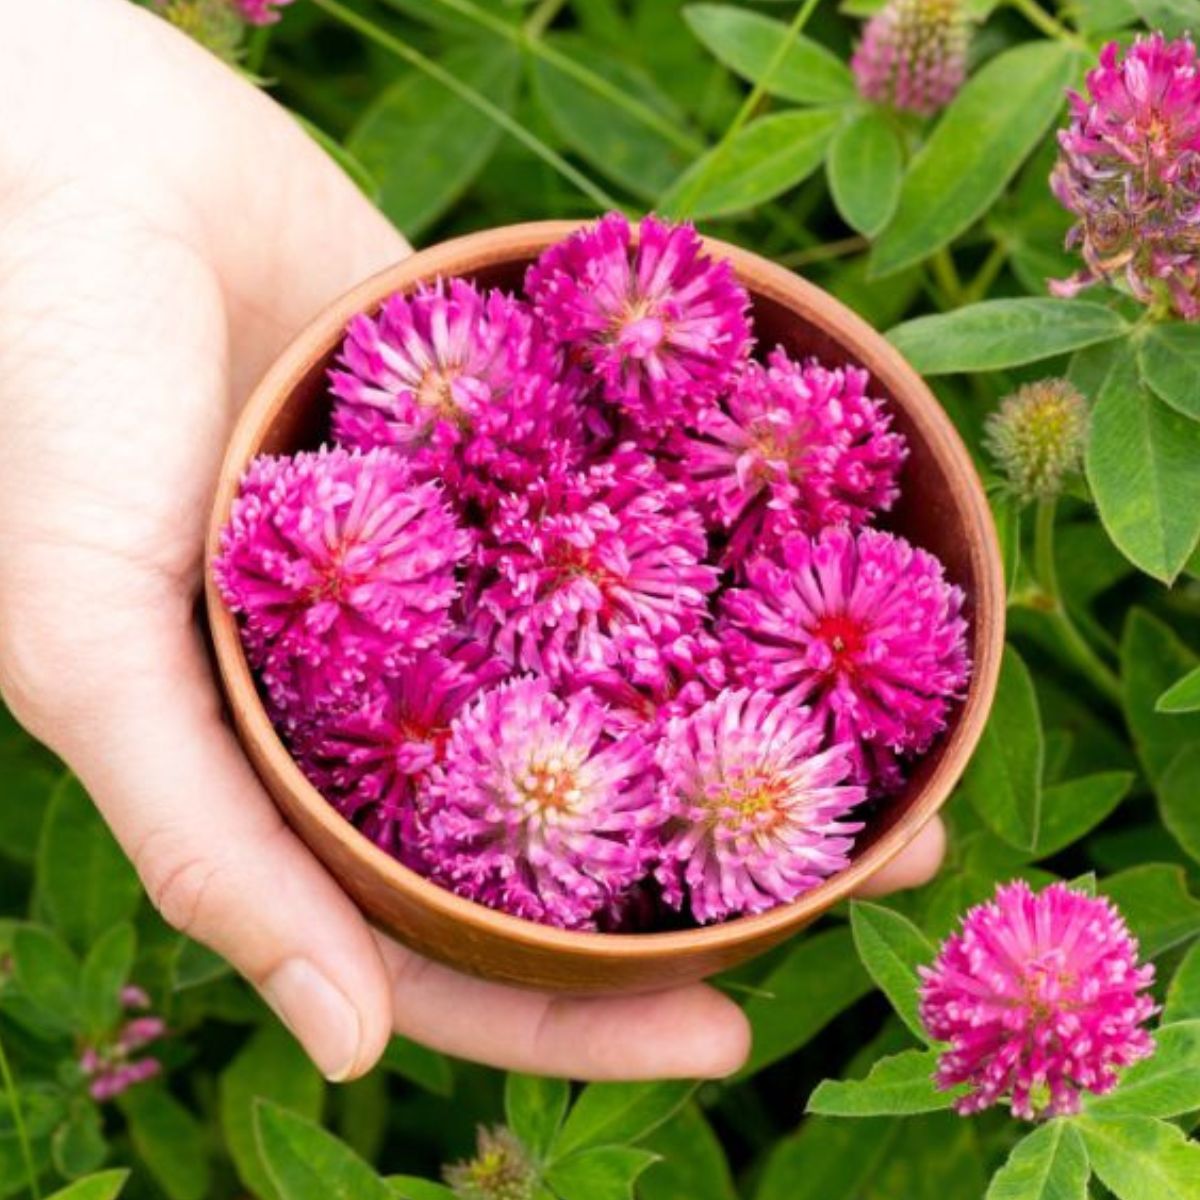 Human hands picking red clover flowers in a small clay bowl